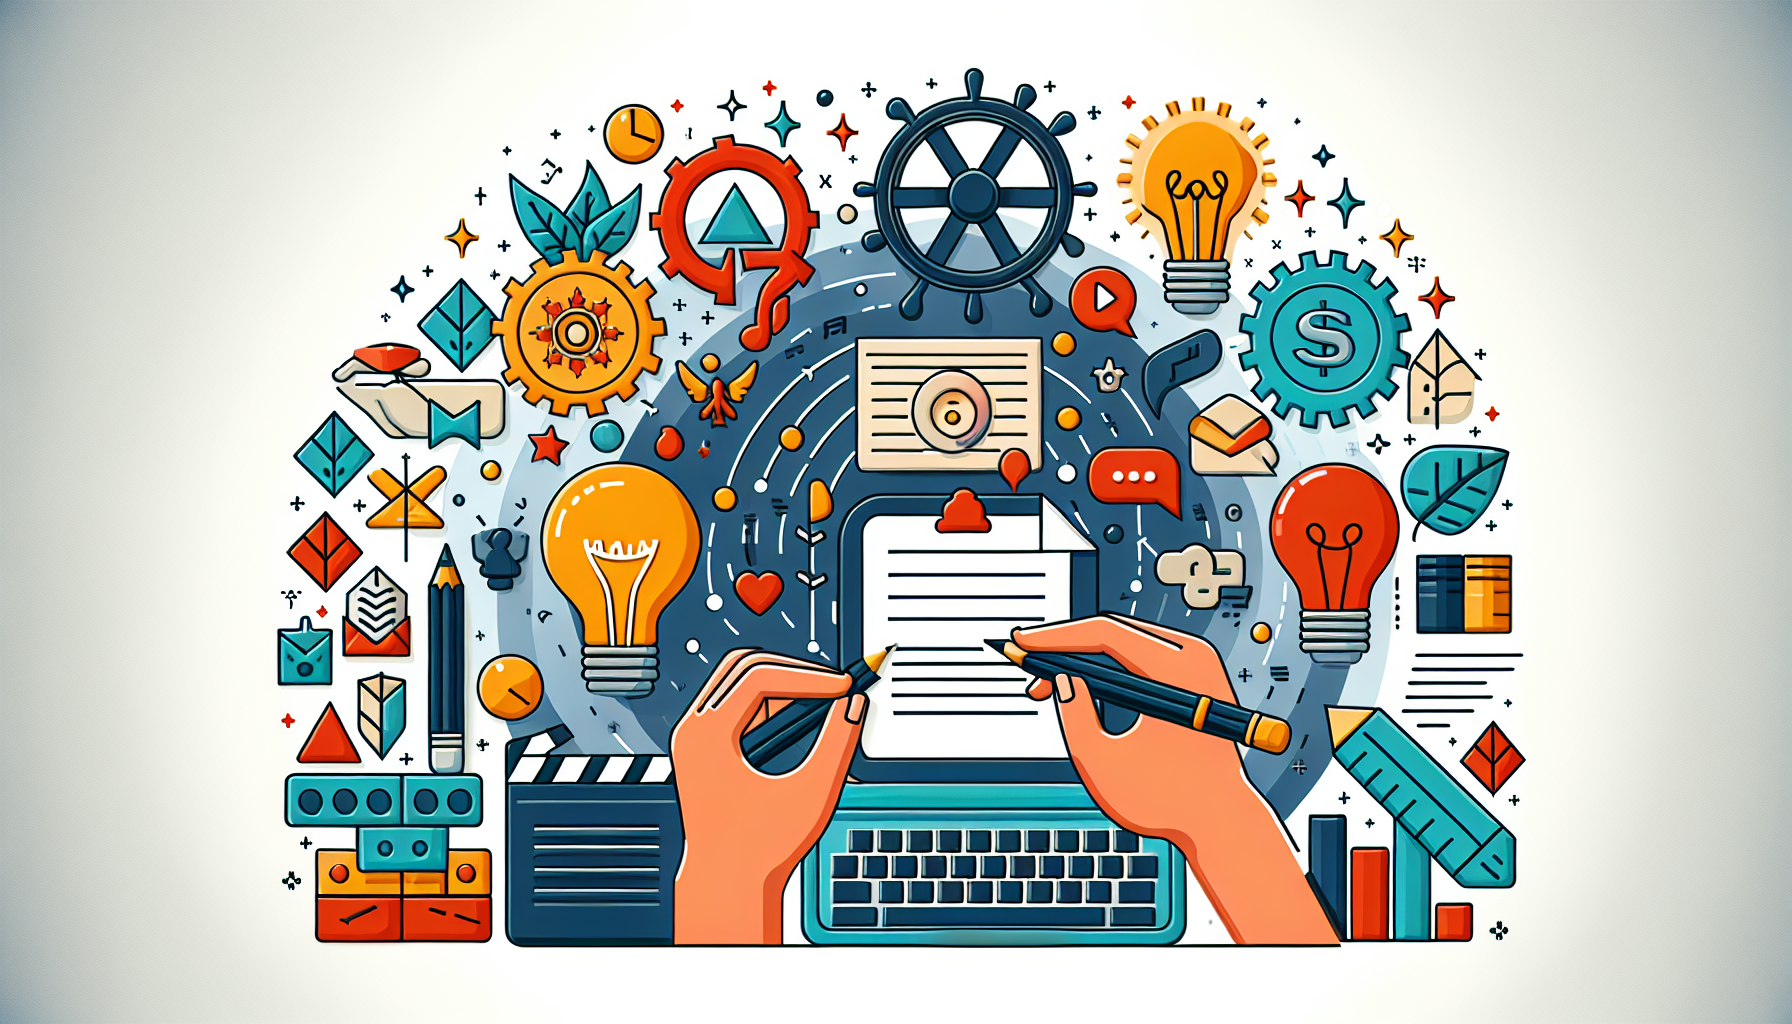 Create a detailed and colorful modern illustration that cleverly depicts effective methods to avoid typical mistakes made in screenplay writing. The illustration should be without any text or words. Include symbols or visual metaphors that indicate elements of the writing process, common pitfalls, and successful strategies.